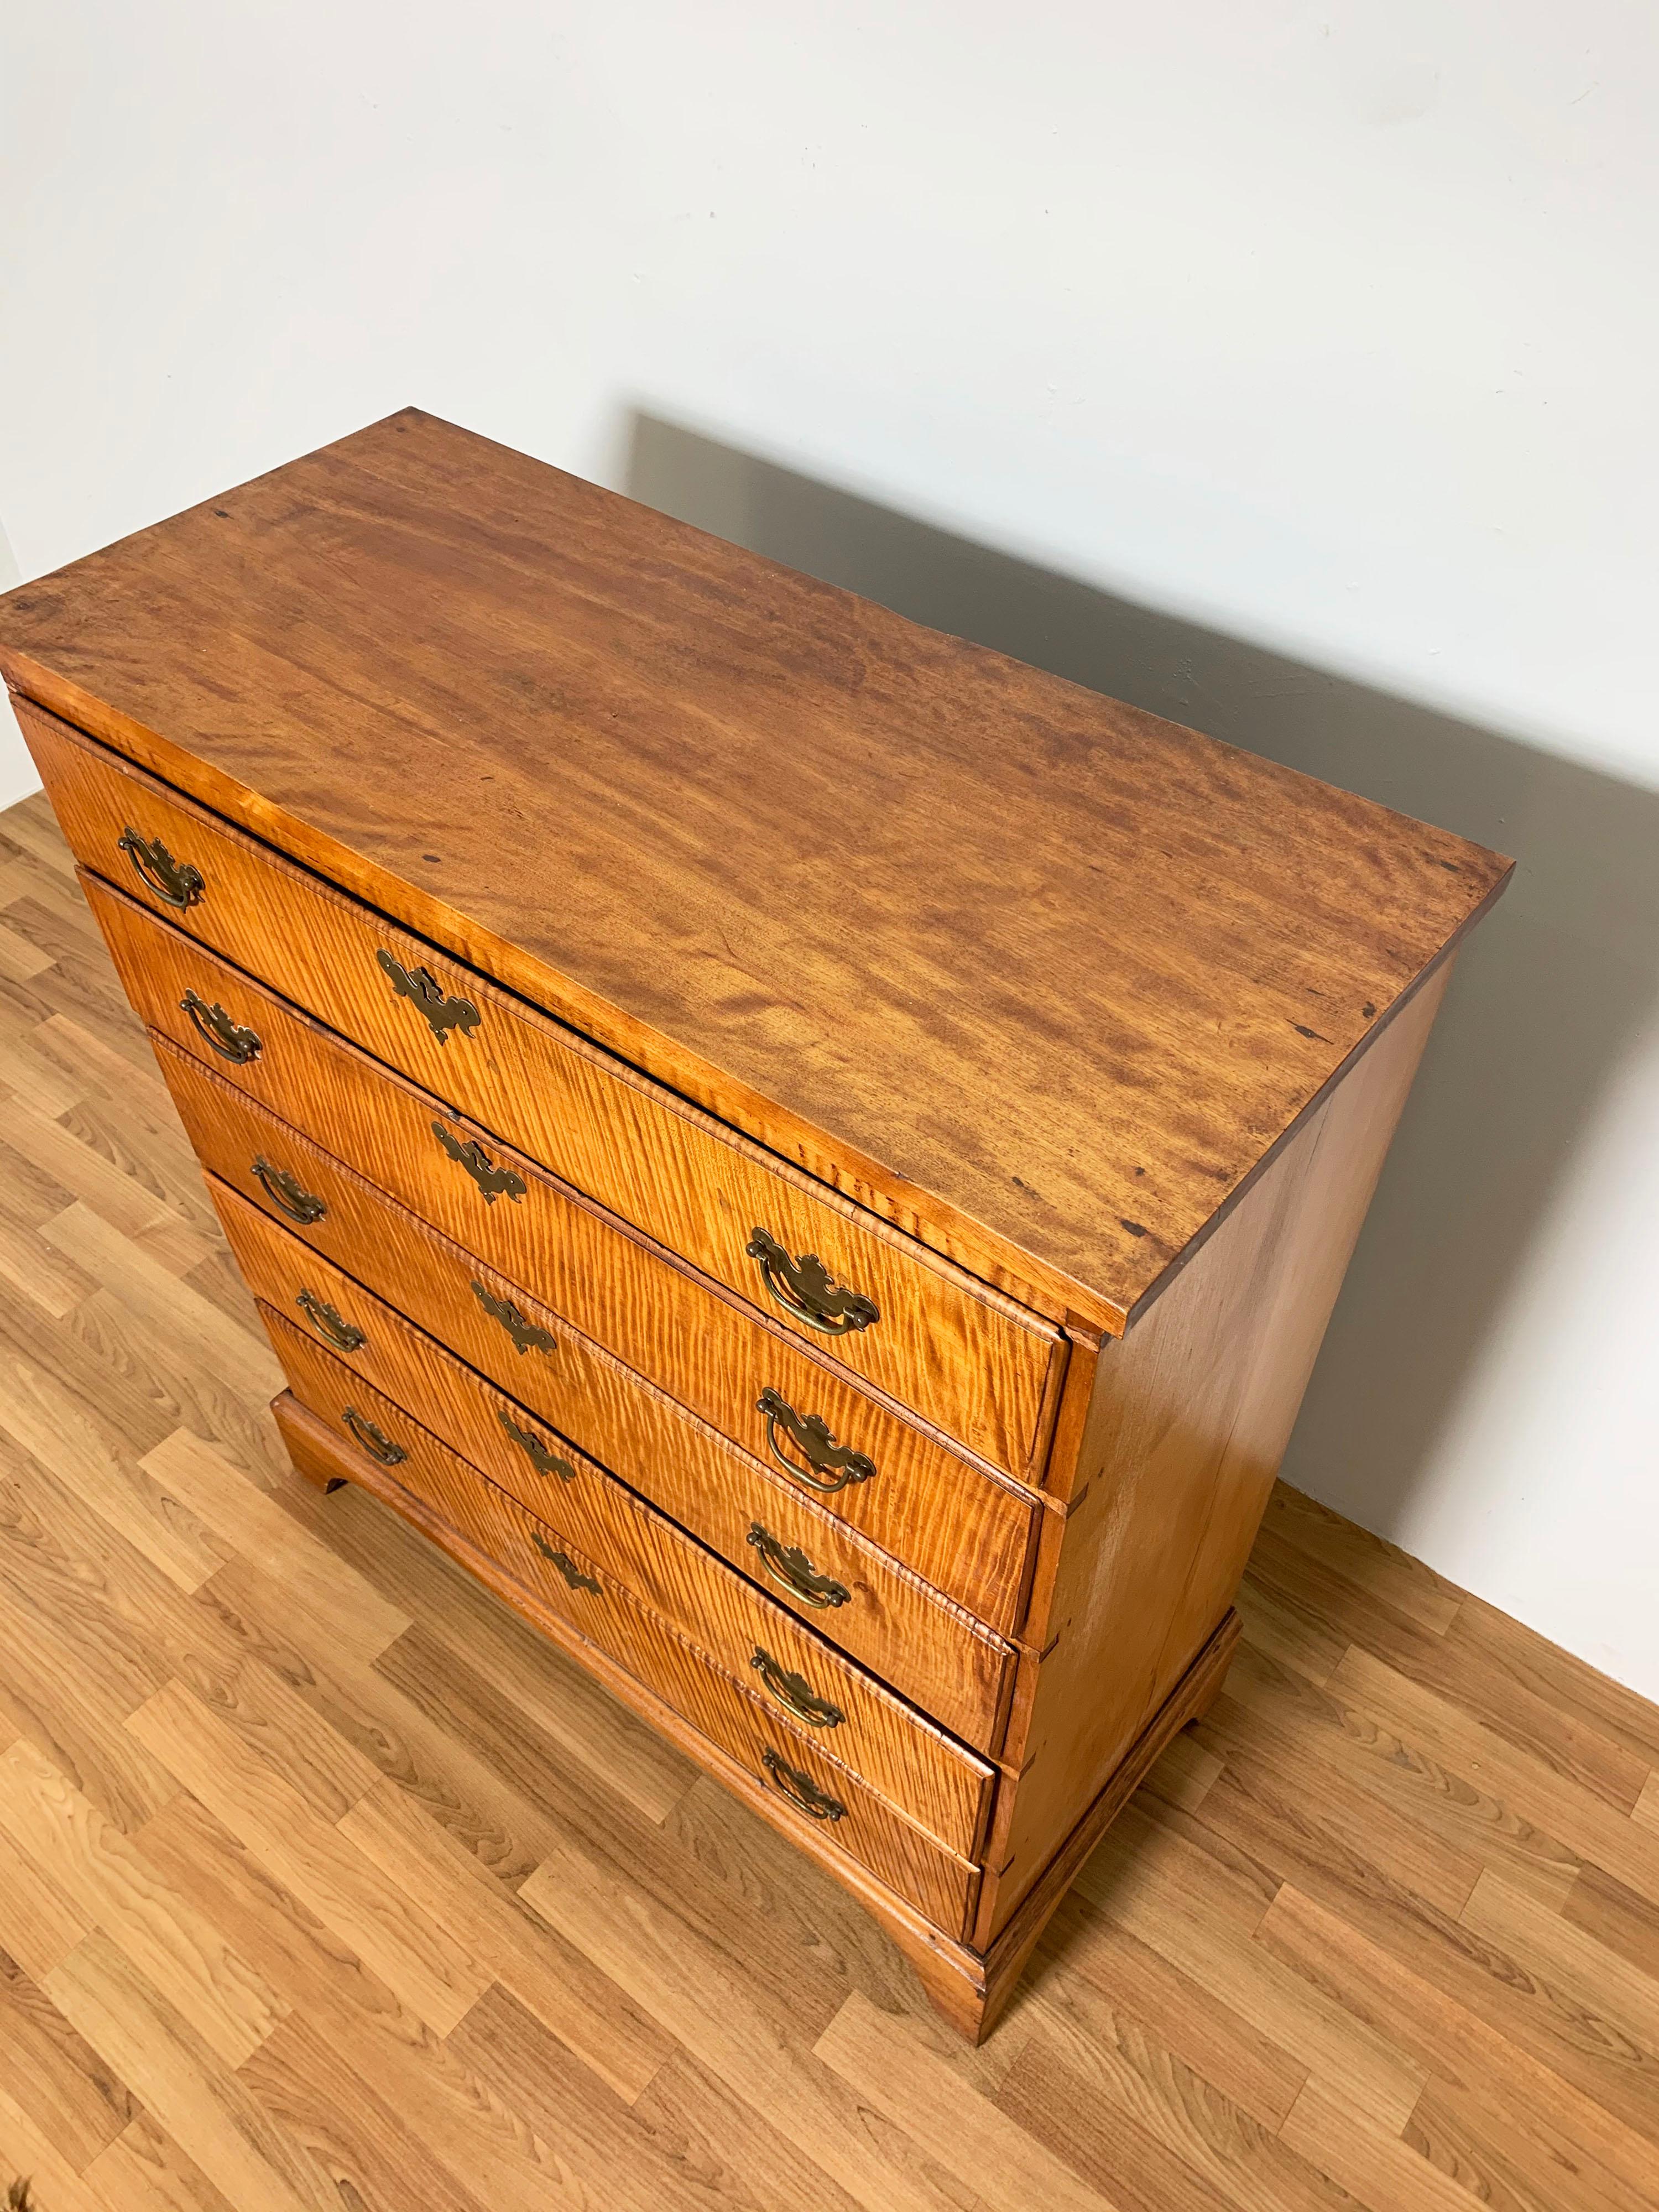 A Chippendale chest of five drawers in very expressive curly tiger maple, made in Massachusetts, ca. 1780.